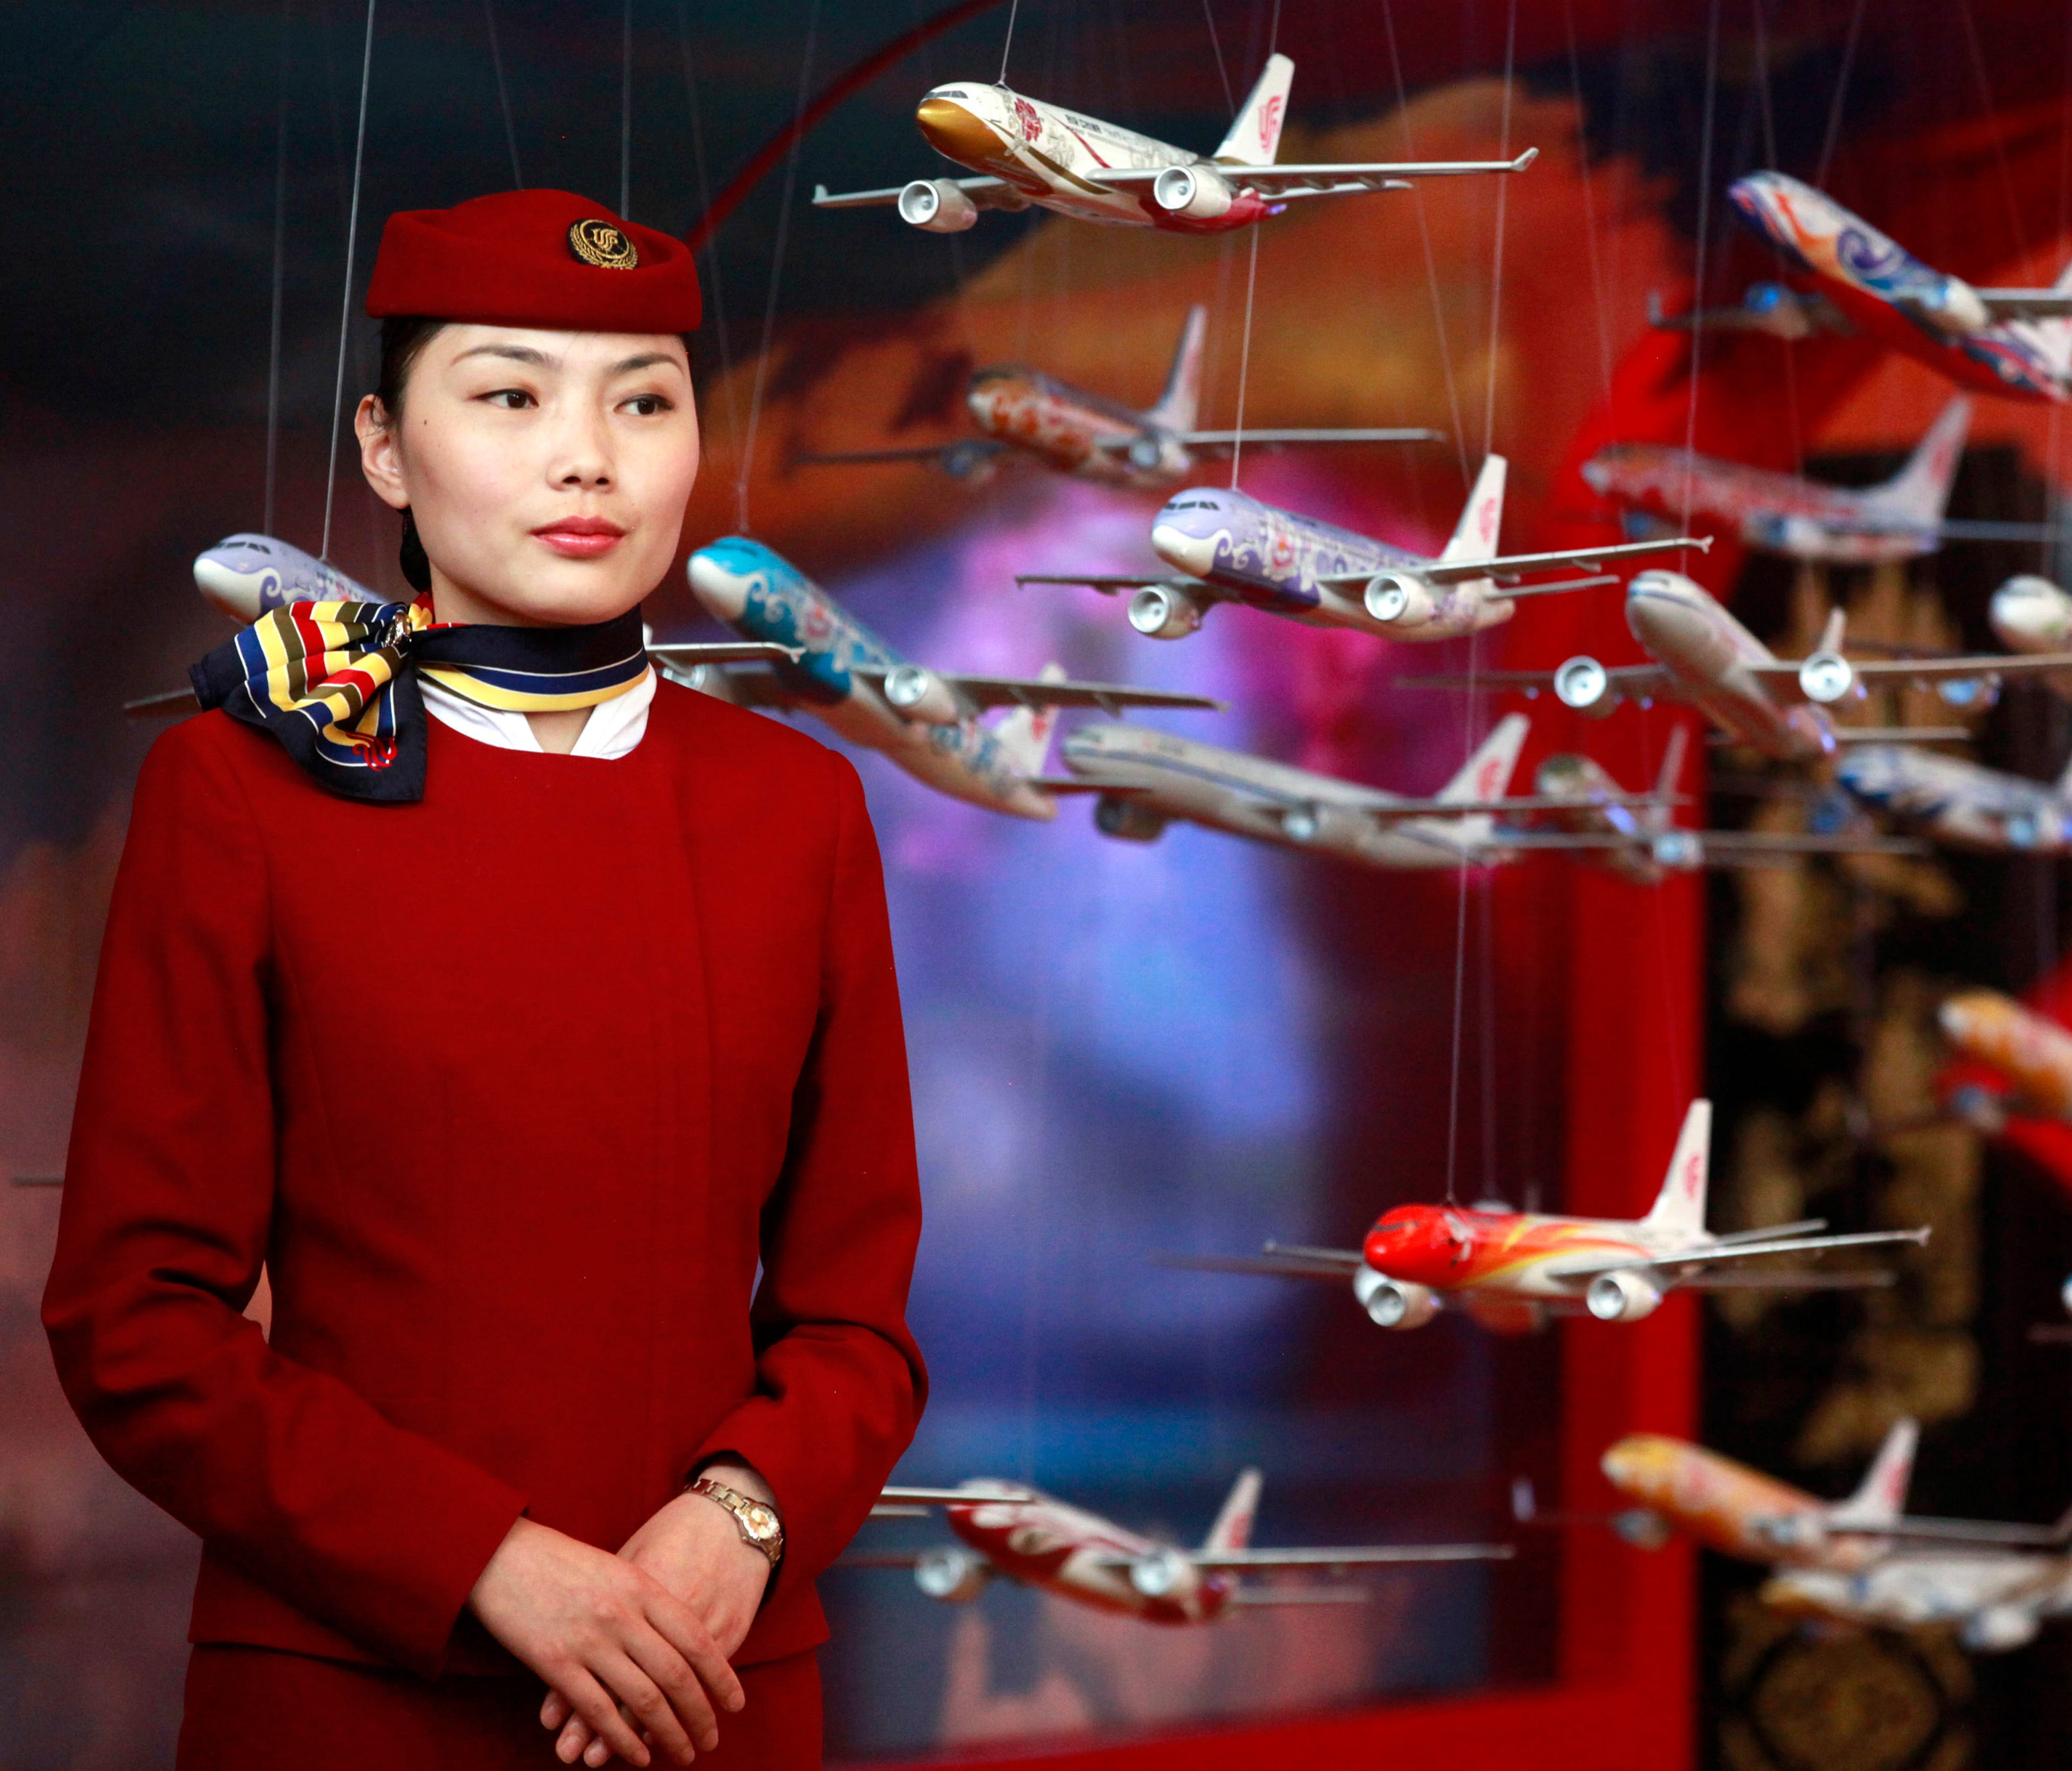 In this file photo from June 12, 2012, an Air China flight attendant stands near model planes at the International Air Transport Association (IATA) 68th Annual General Meeting (AGM) and World Air Transport Summit in Beijing.